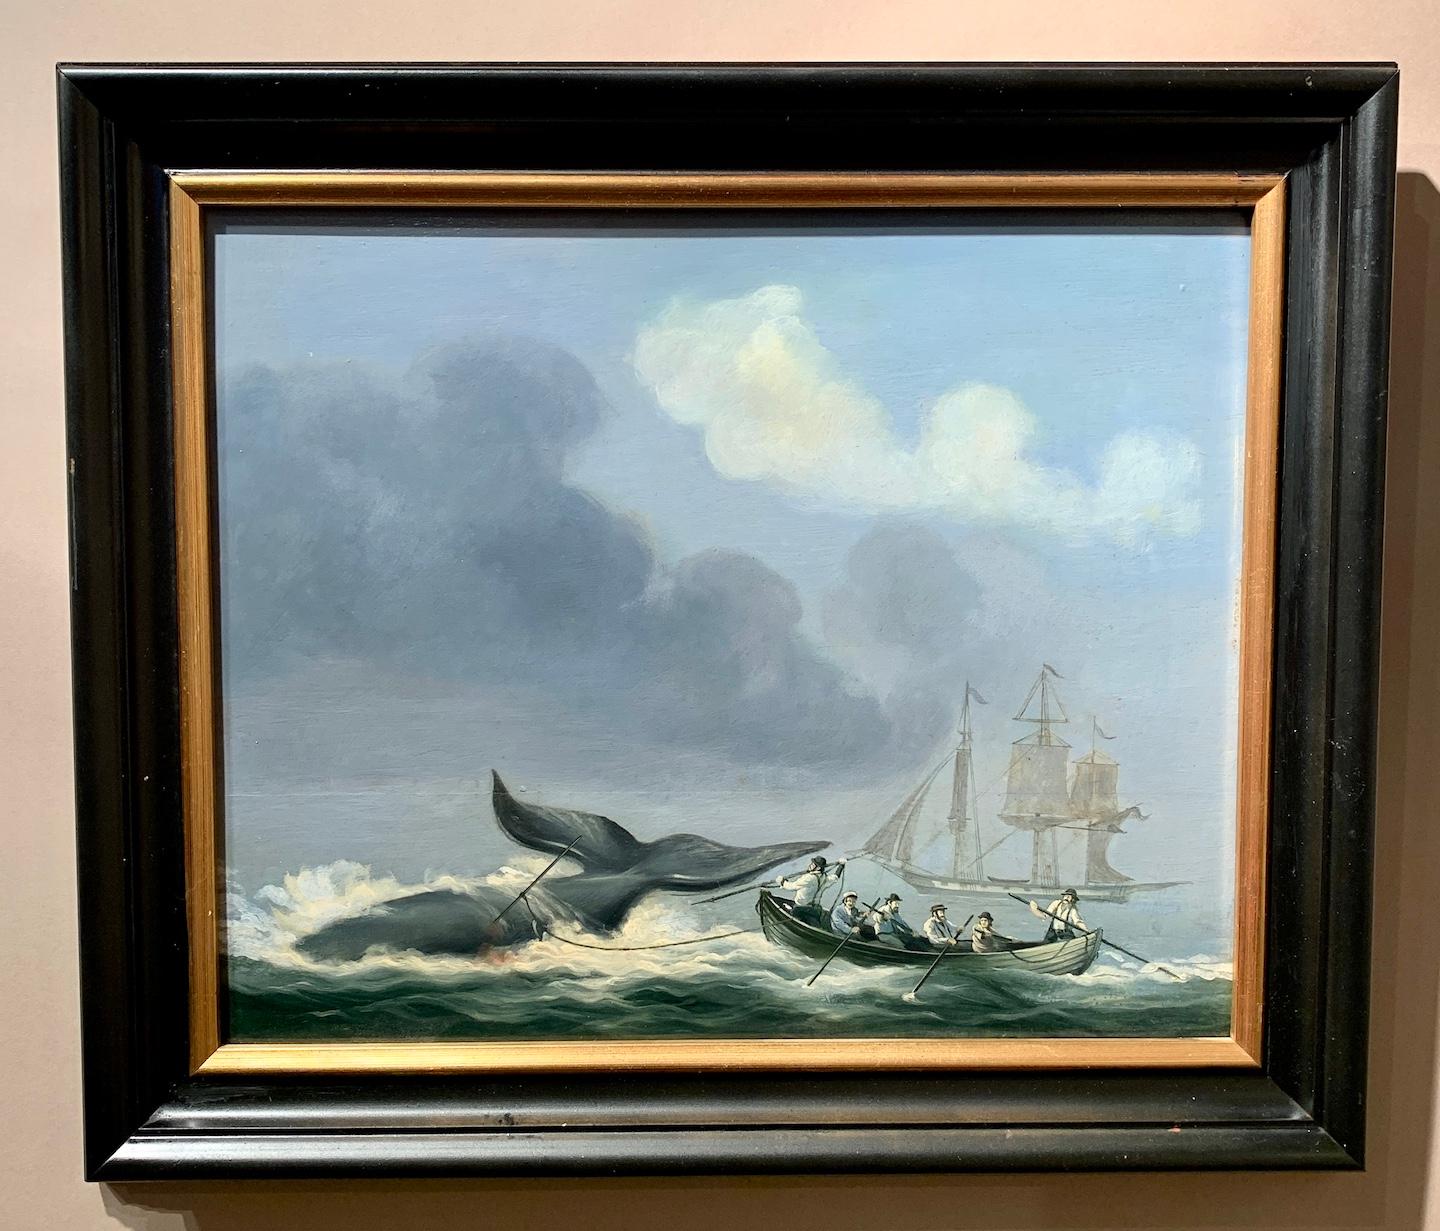 19th century American School Animal Painting - 19th century North East American whaling boats at sea with Whale attack